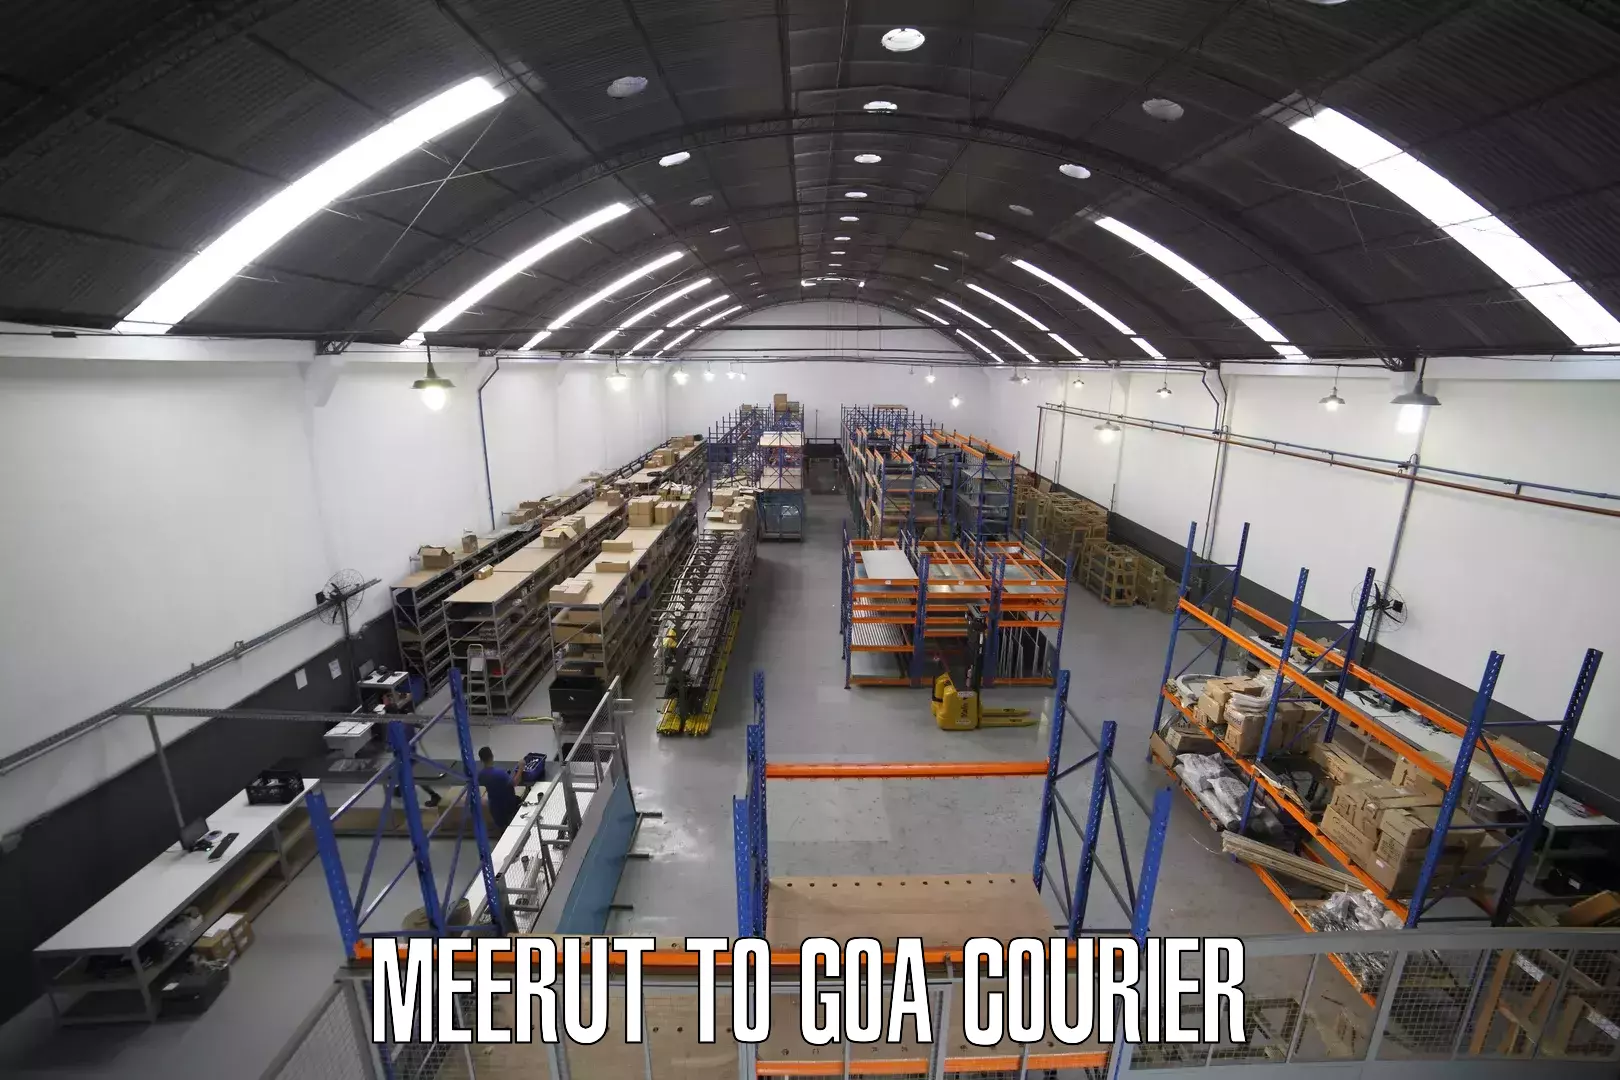 Subscription-based courier Meerut to Canacona